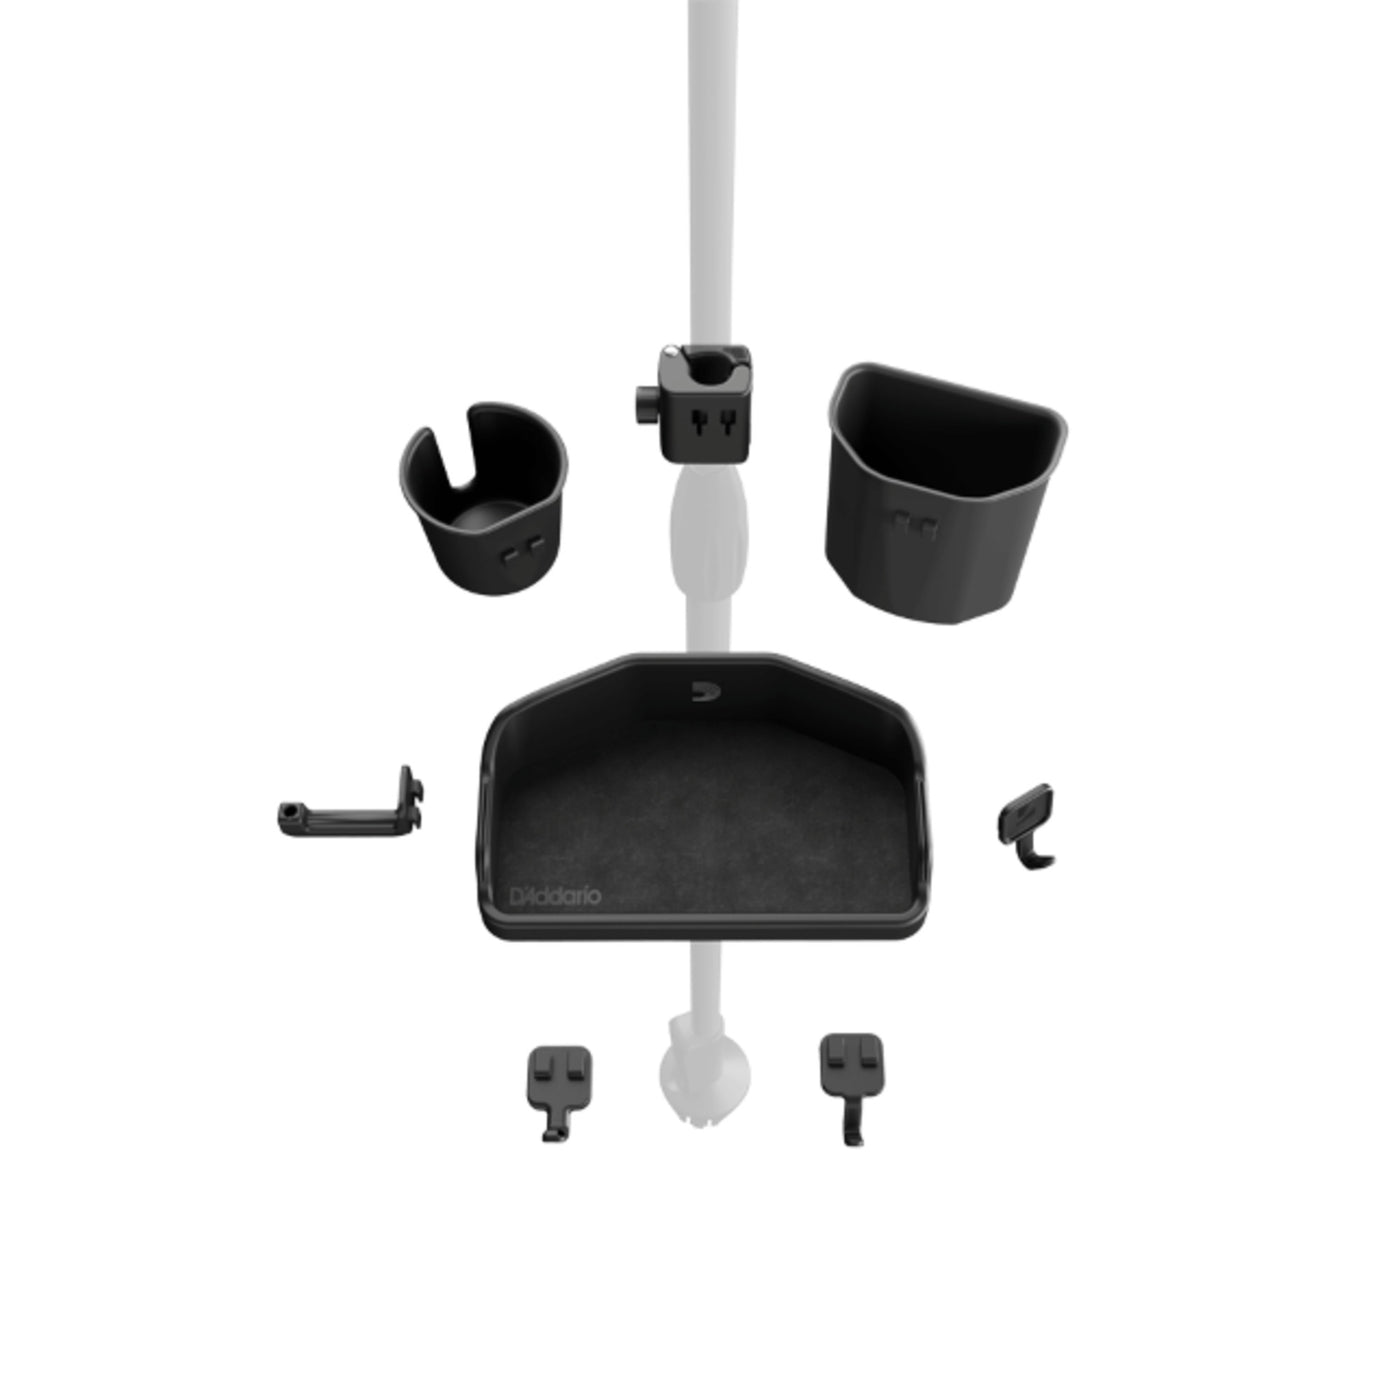 D'Addario Mic Stand Accessory System - Cup Holder (PW-MSASCH-01)